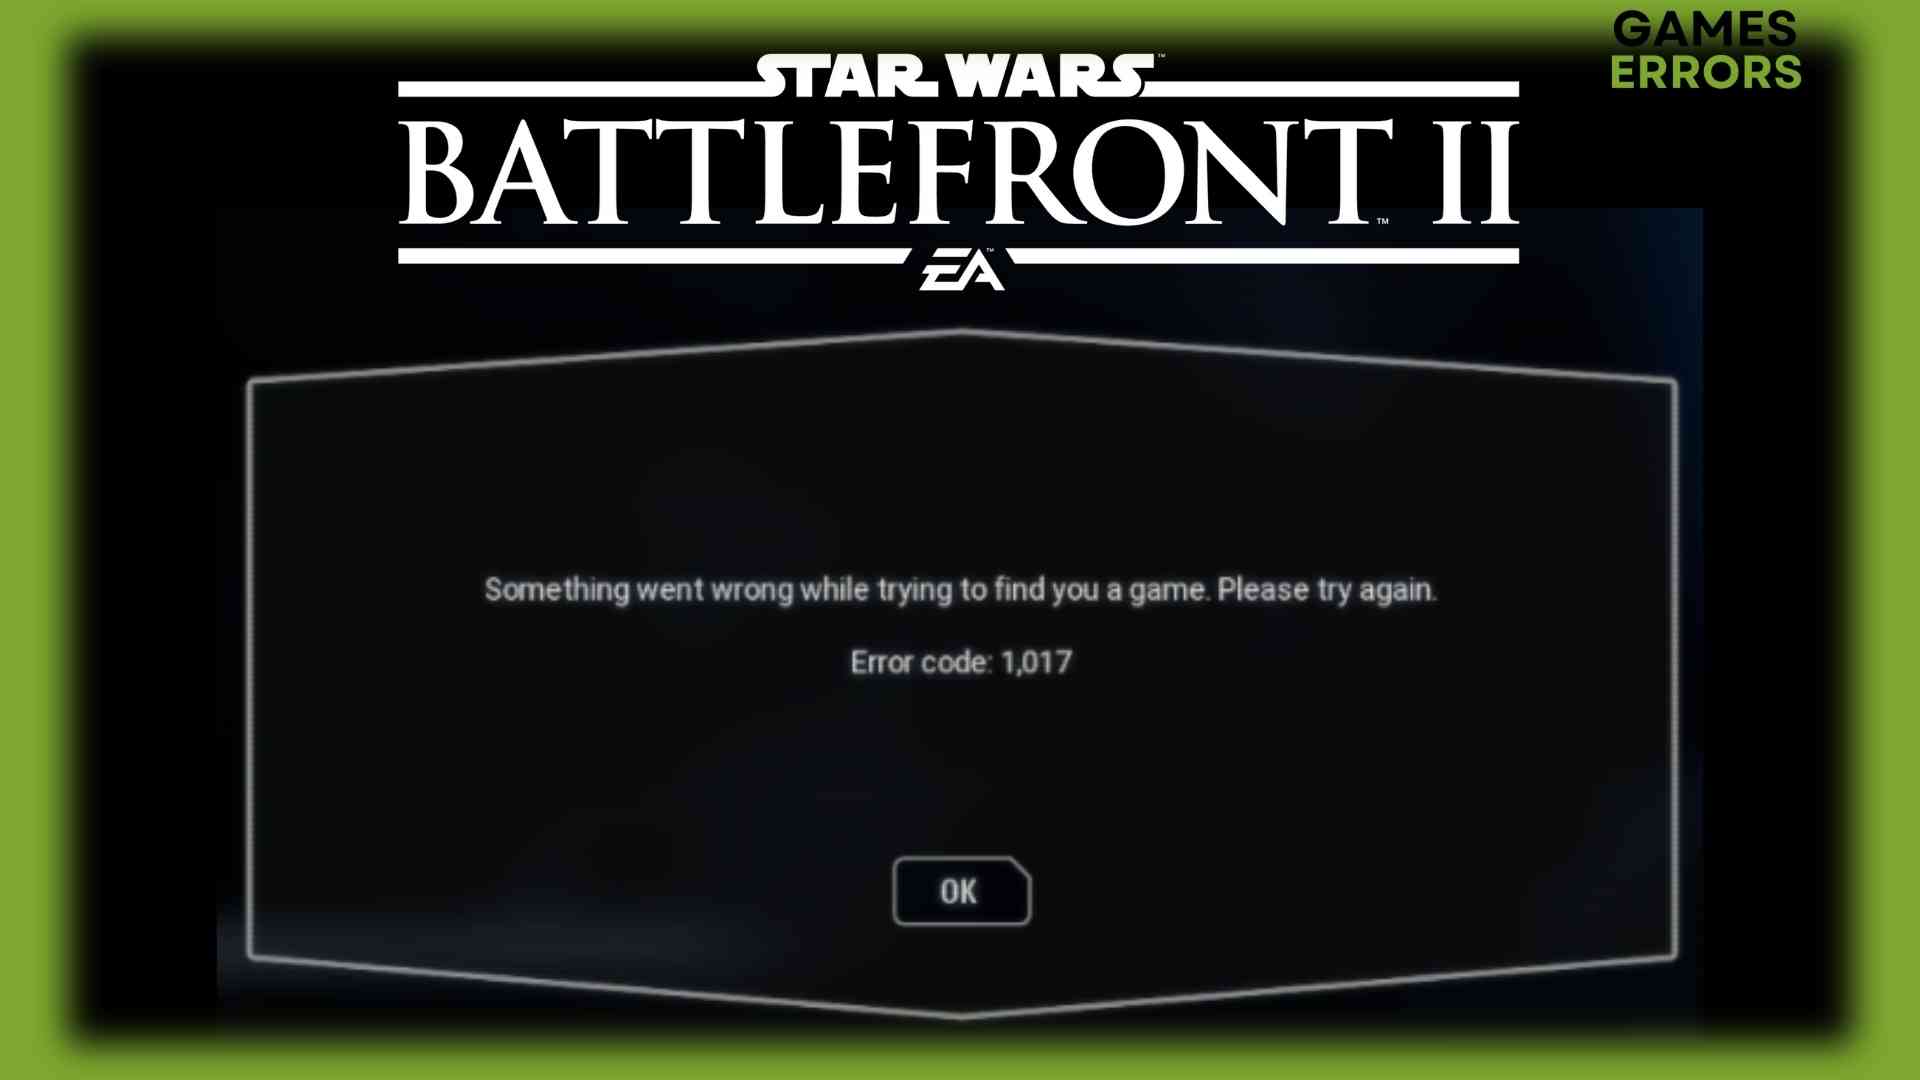 Check system requirements: Ensure that your system meets the minimum requirements to run Star Wars Battlefront 2.
Reinstall the game: Uninstall and reinstall the game to fix any potential installation issues.